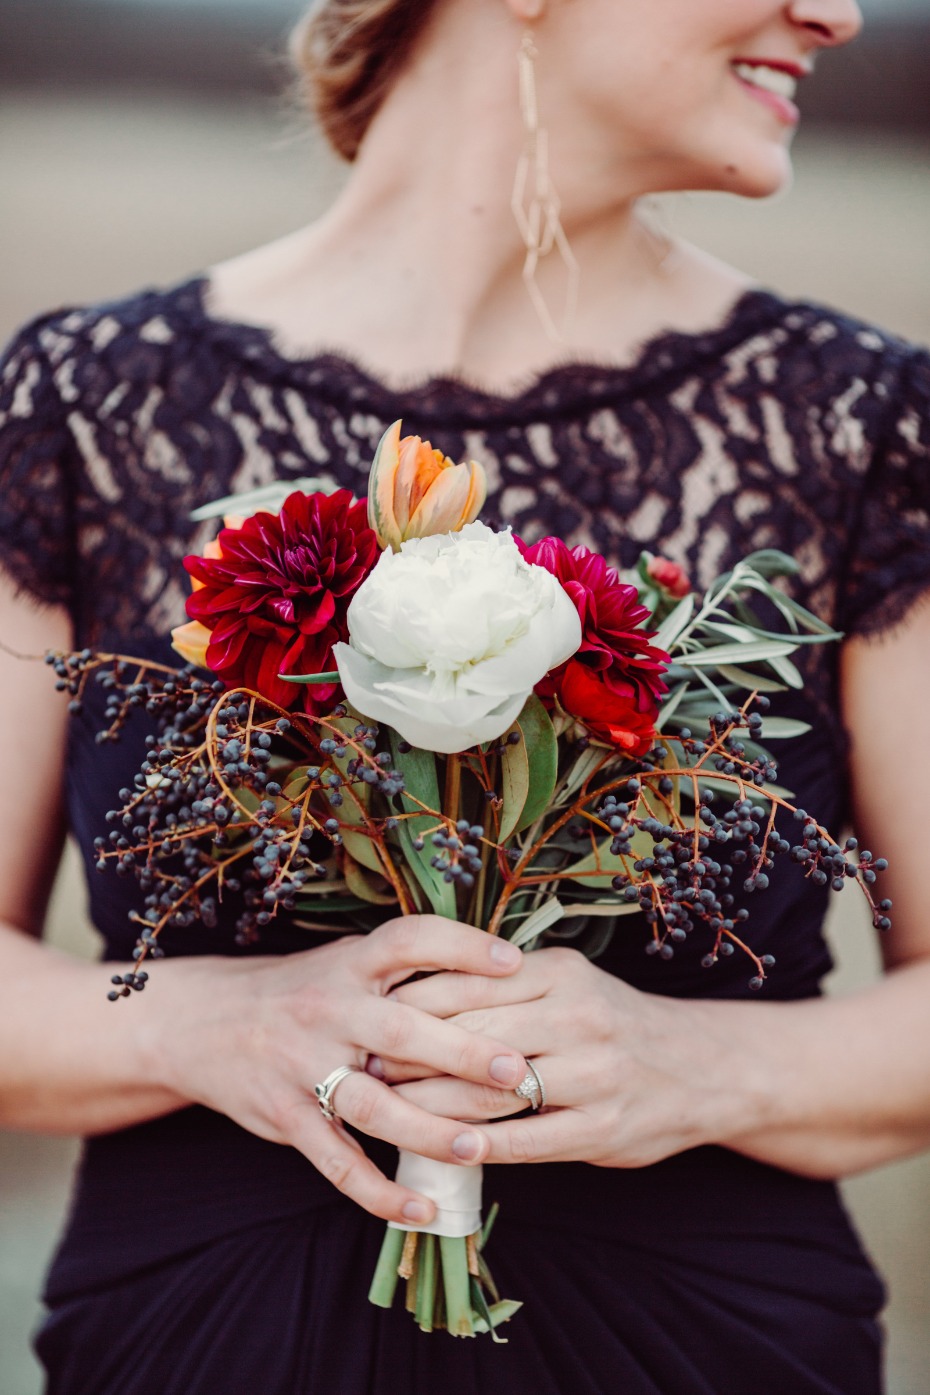 DIY bridesmaid bouquet from FiftyFlowers